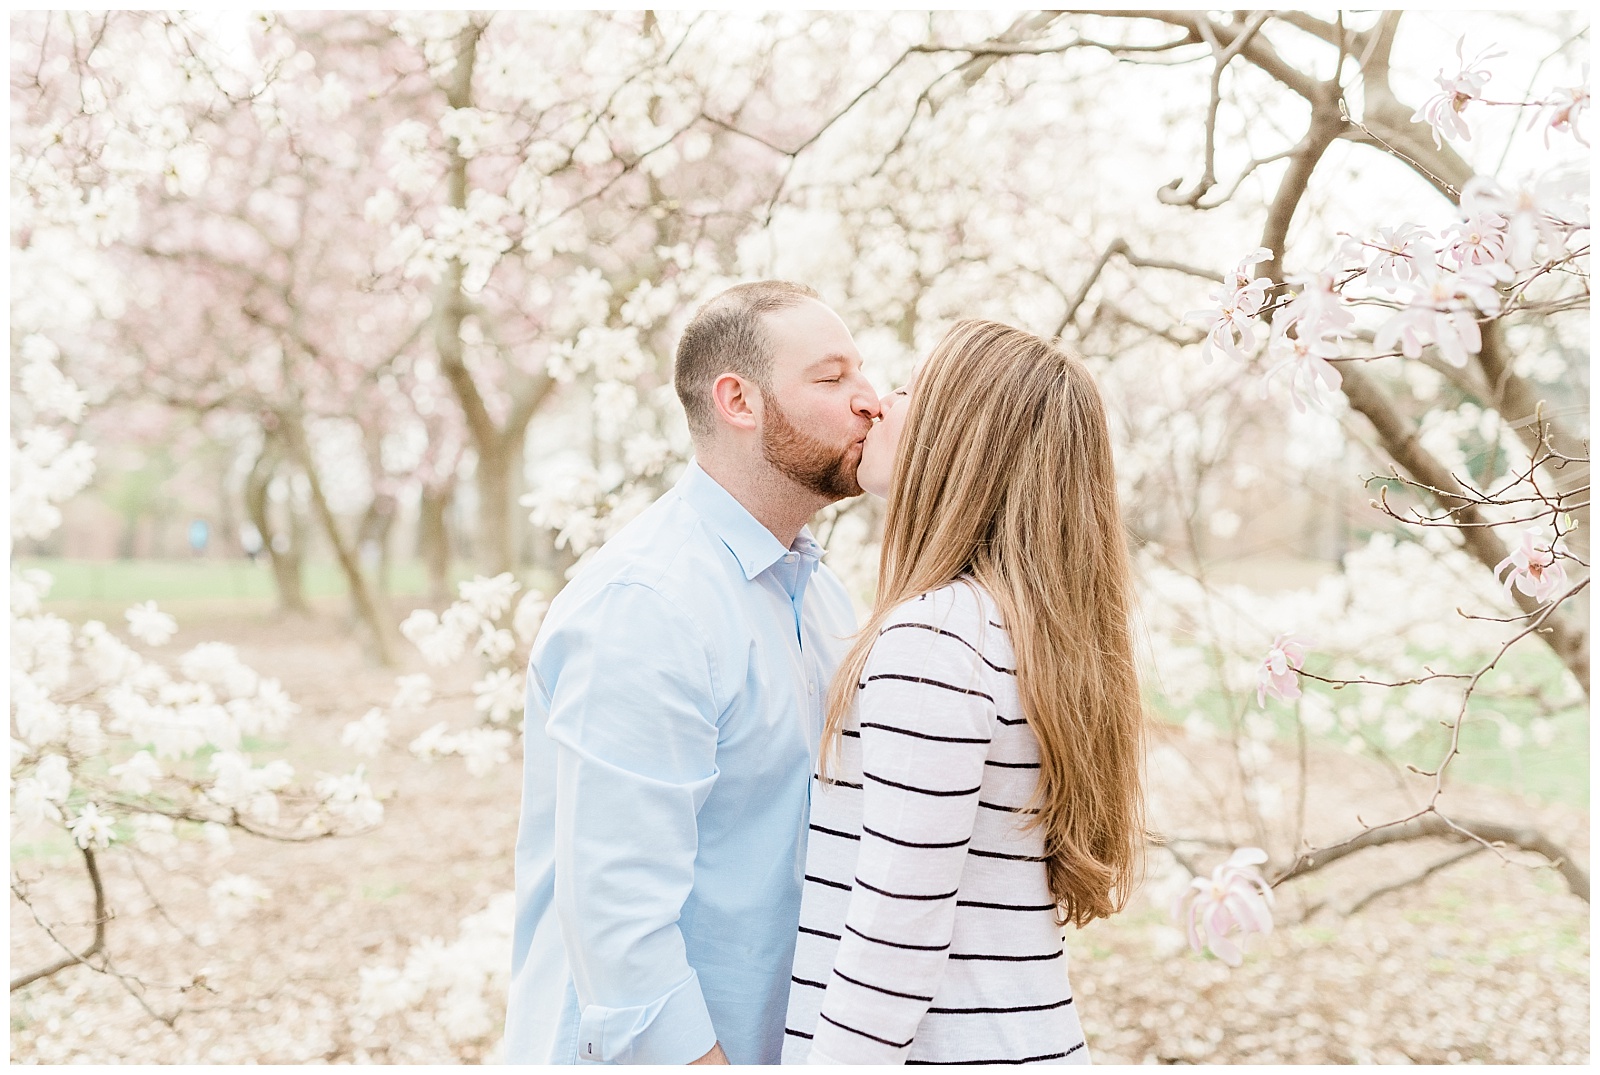 Central Park, NYC engagement session, springtime, wedding photographer, New York, flowers, spring, airy